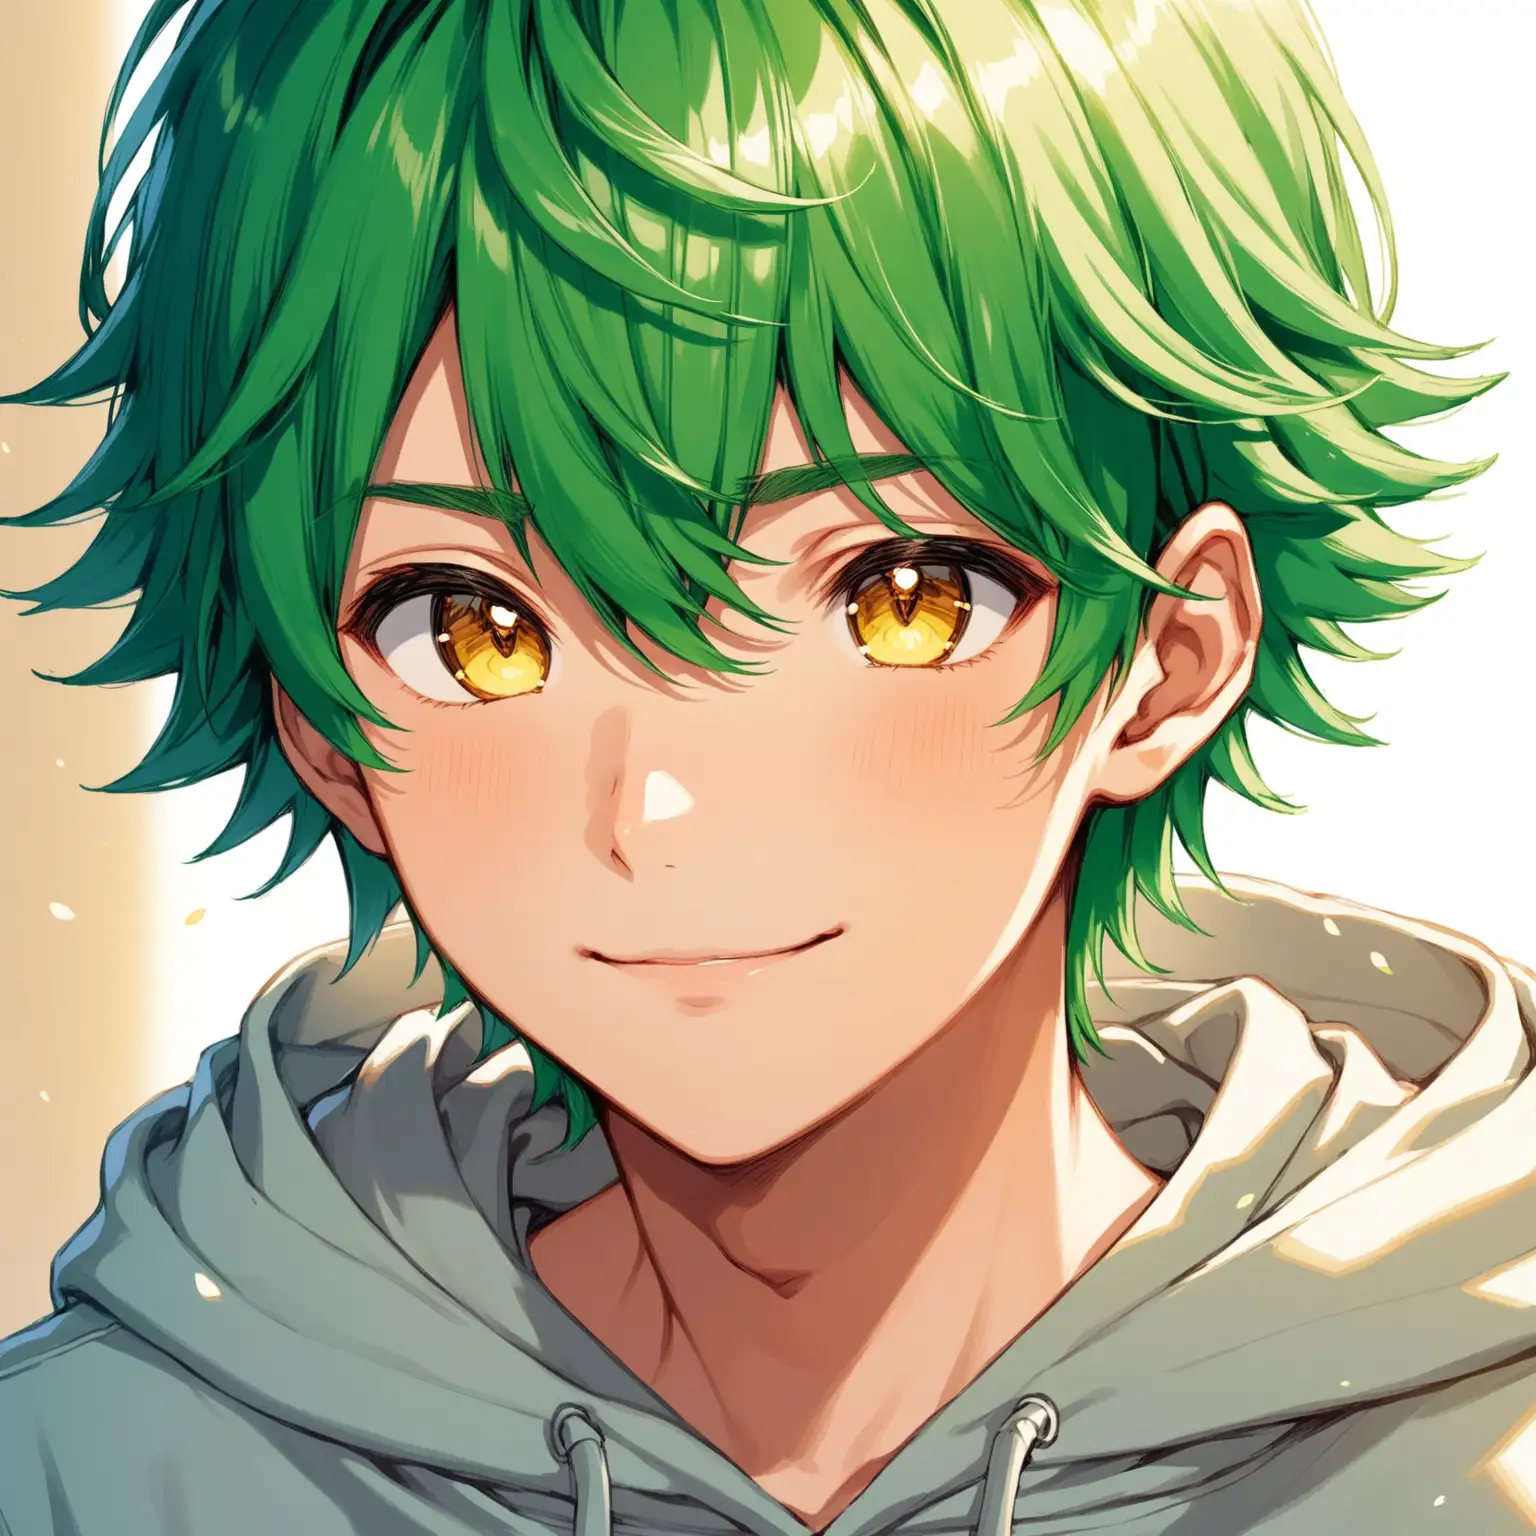 Draw cute anime boy, high quality, close up, natural lighting, hoodie, wavy green hair, gold eyes, closed-lip smile